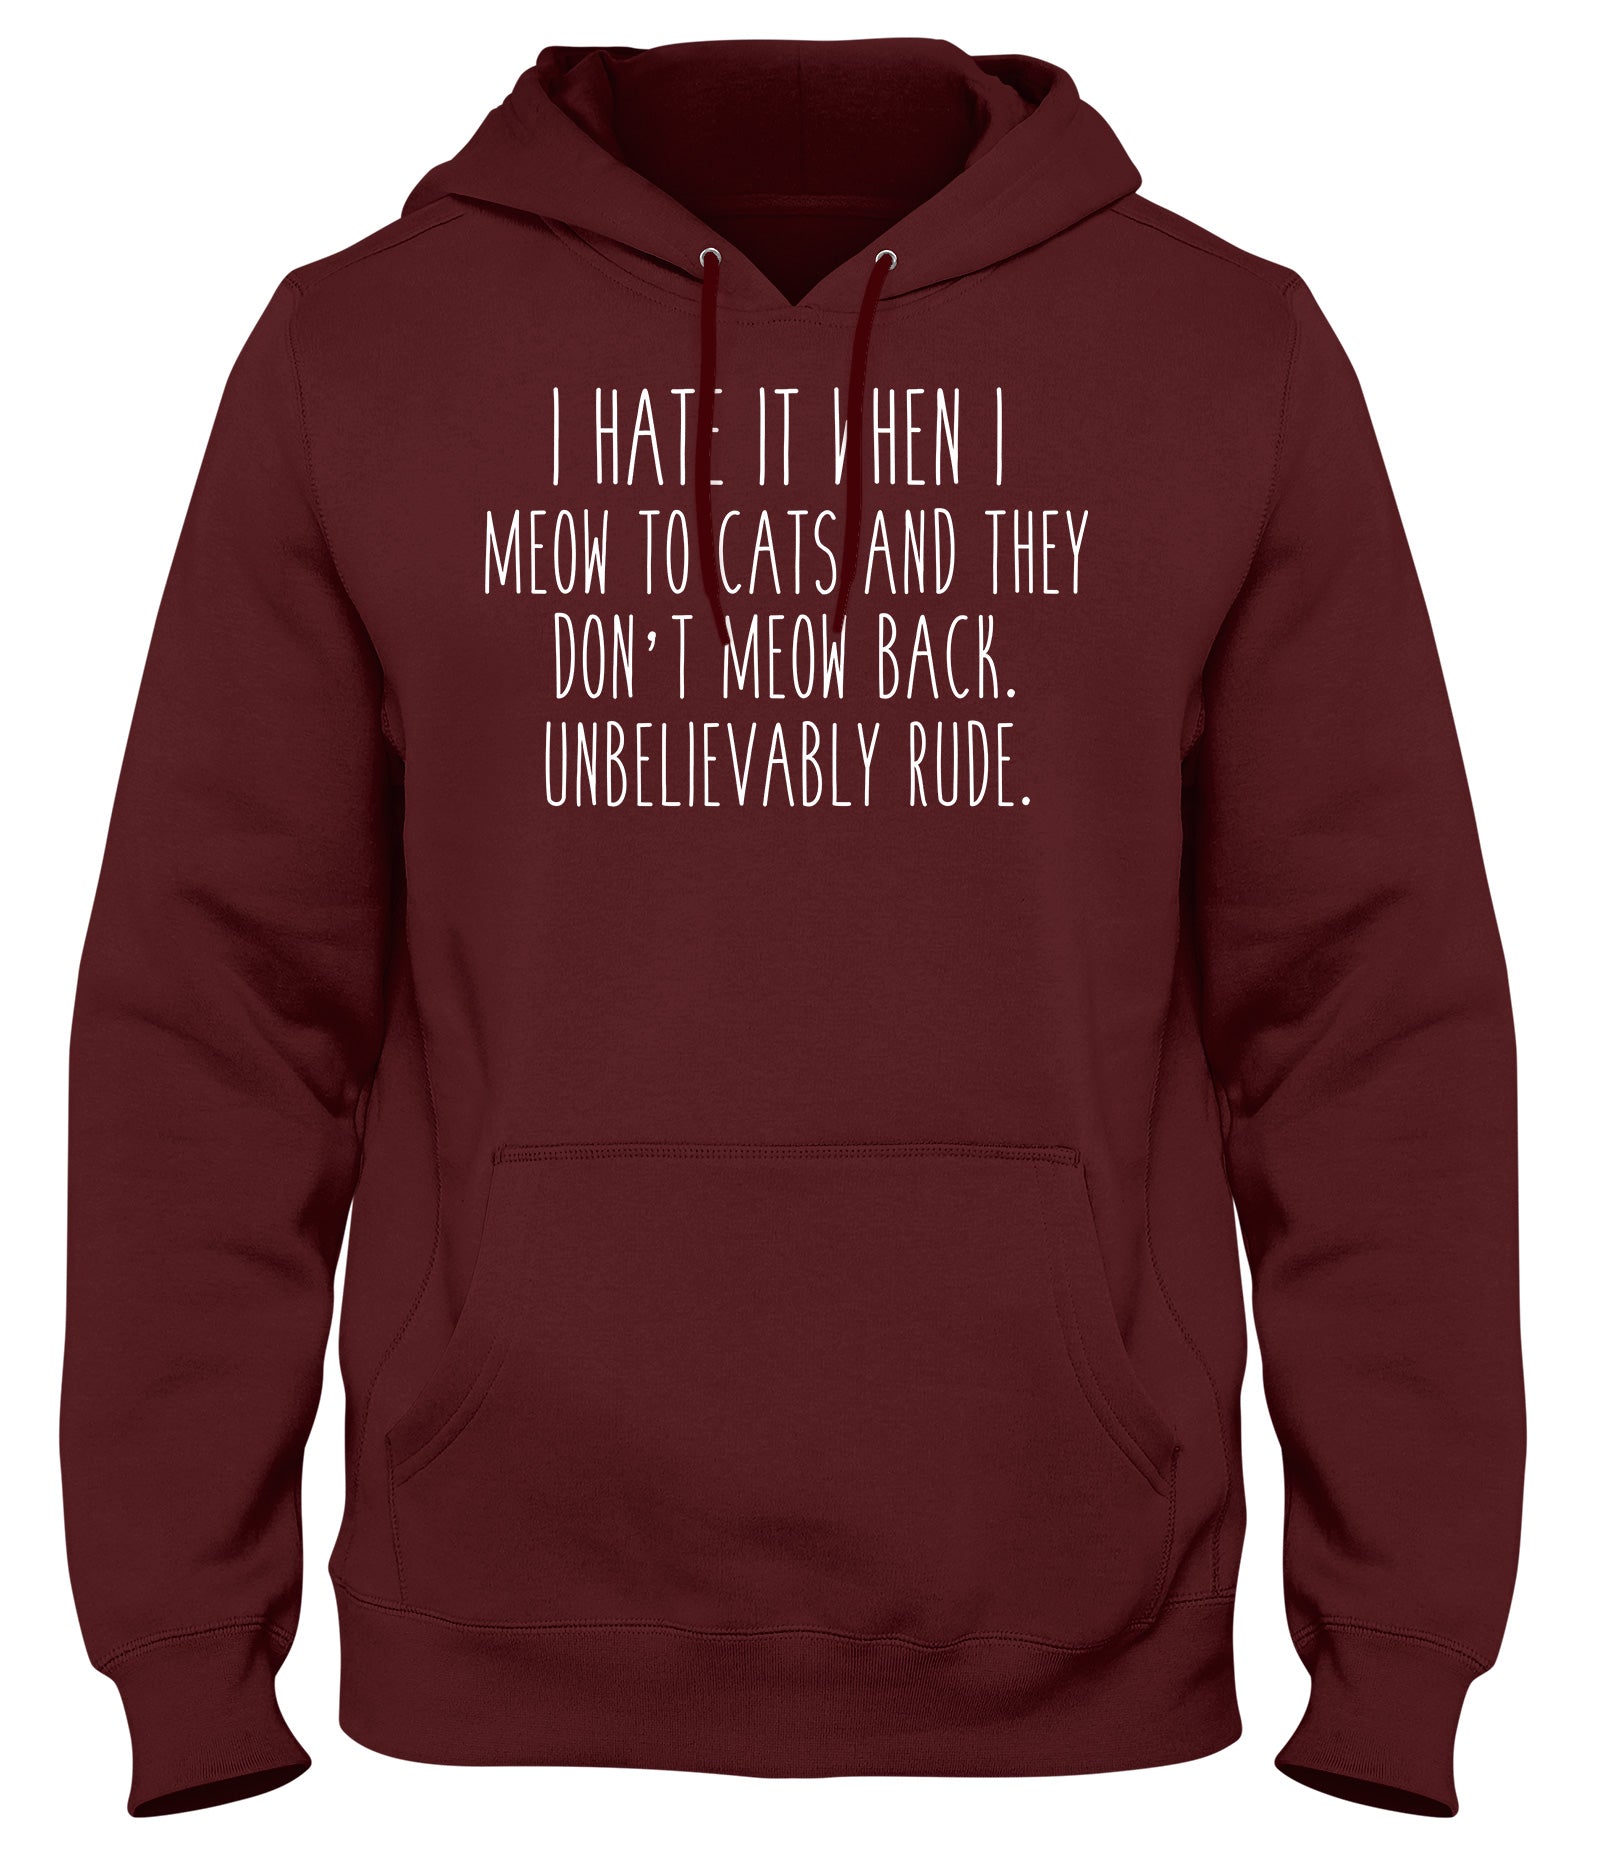 I HATE IT WHEN I MEOW TO CATS AND THEY DON'T MEOW BACK. UNBELIEVABLY RUDE MENS WOMENS UNISEX FUNNY HOODIE